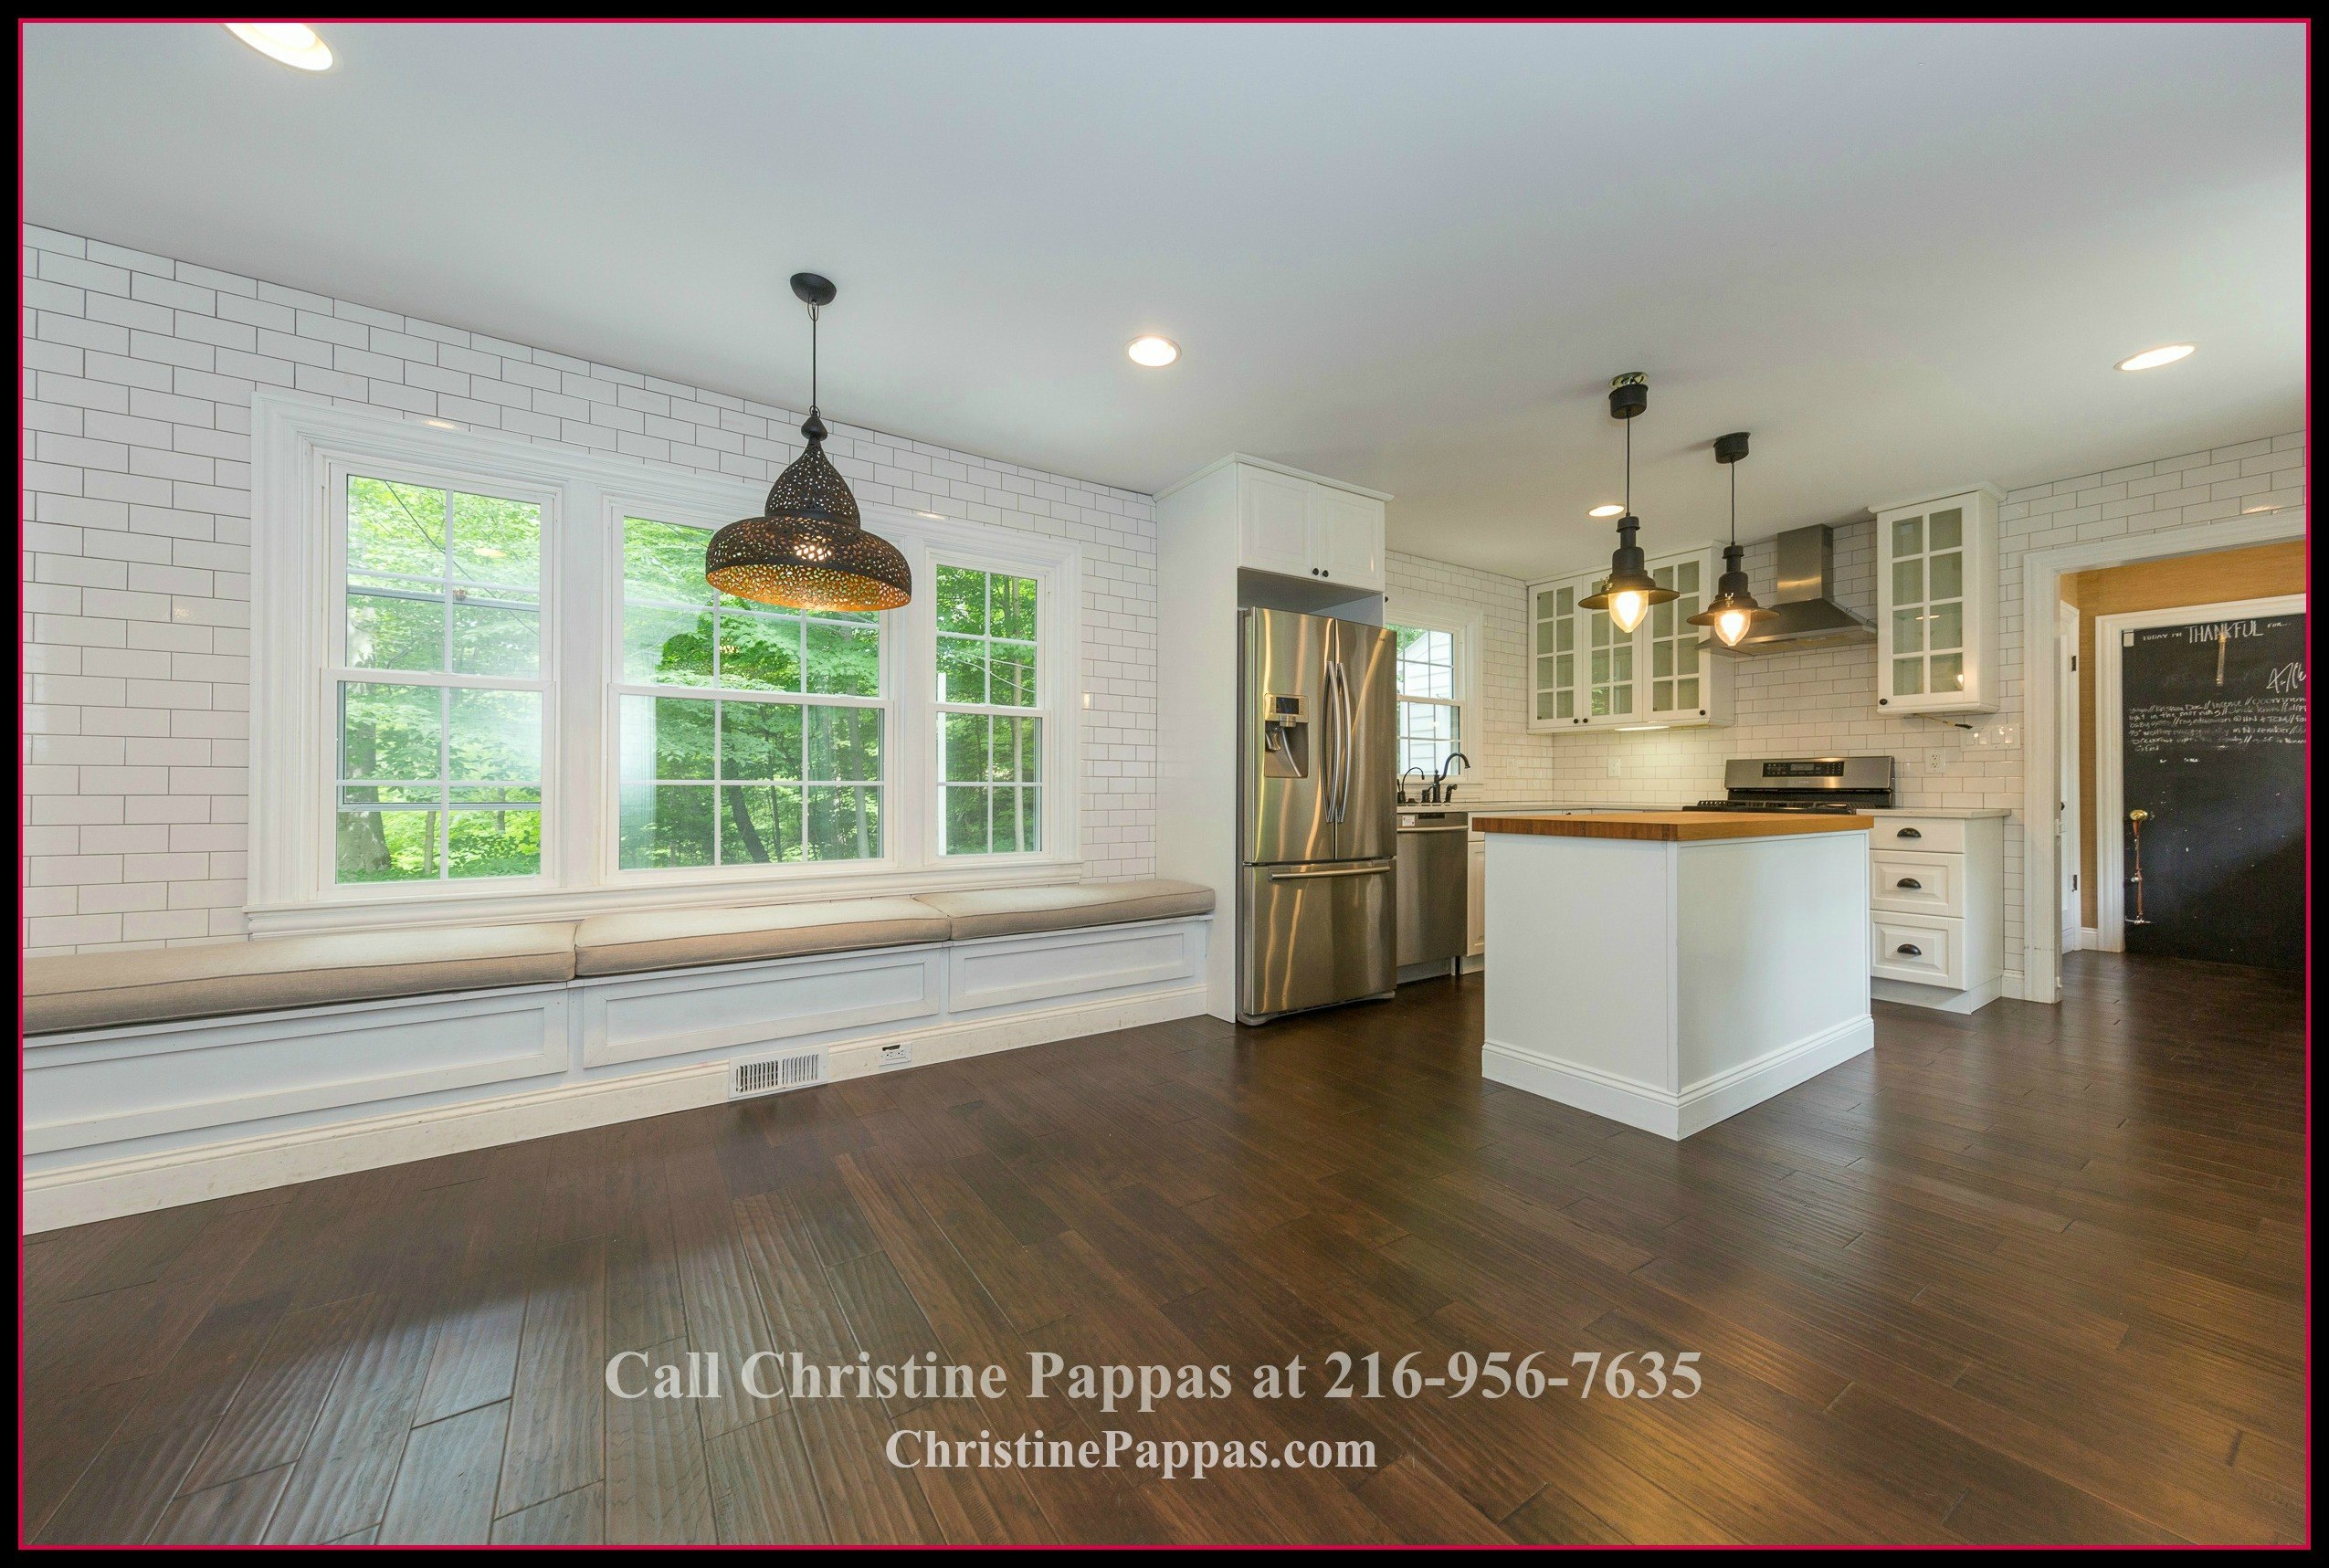 You will surely enjoy every sumptuous meal served in the dining area of this lovely home for sale in Gates Mills OH.